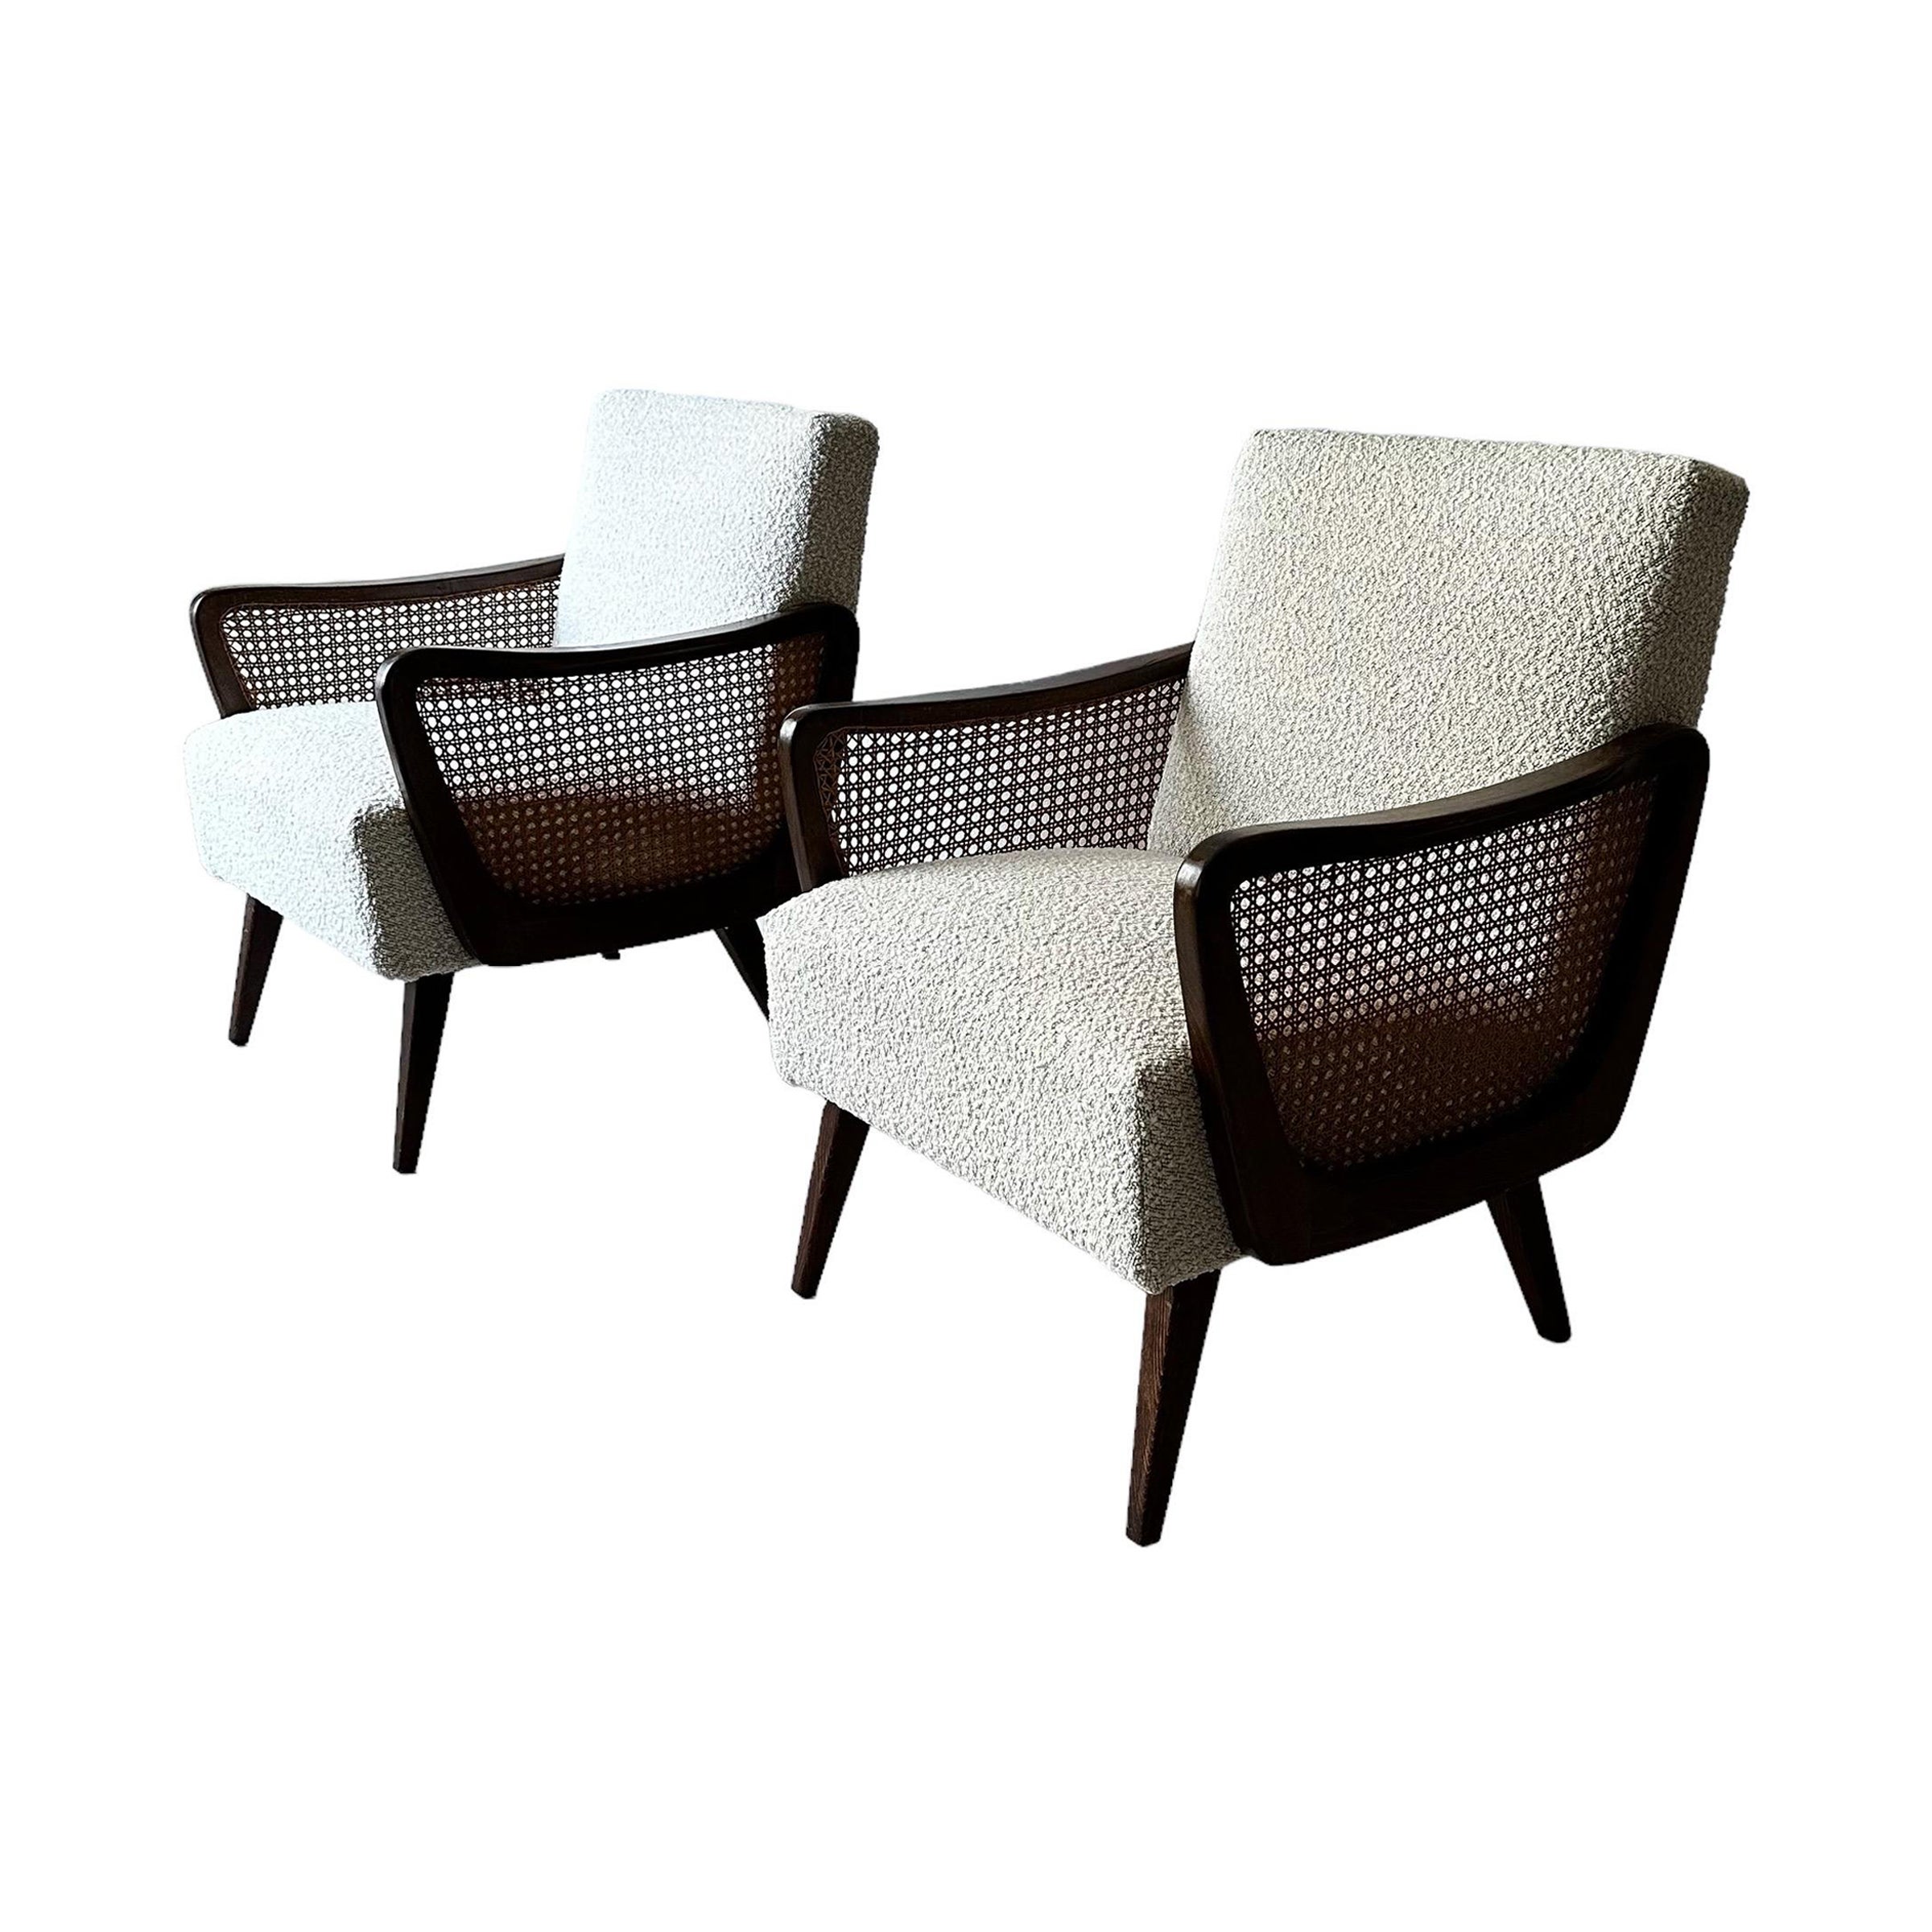 Austrian Arm Chairs in Boucle and Wicker, 1950s For Sale